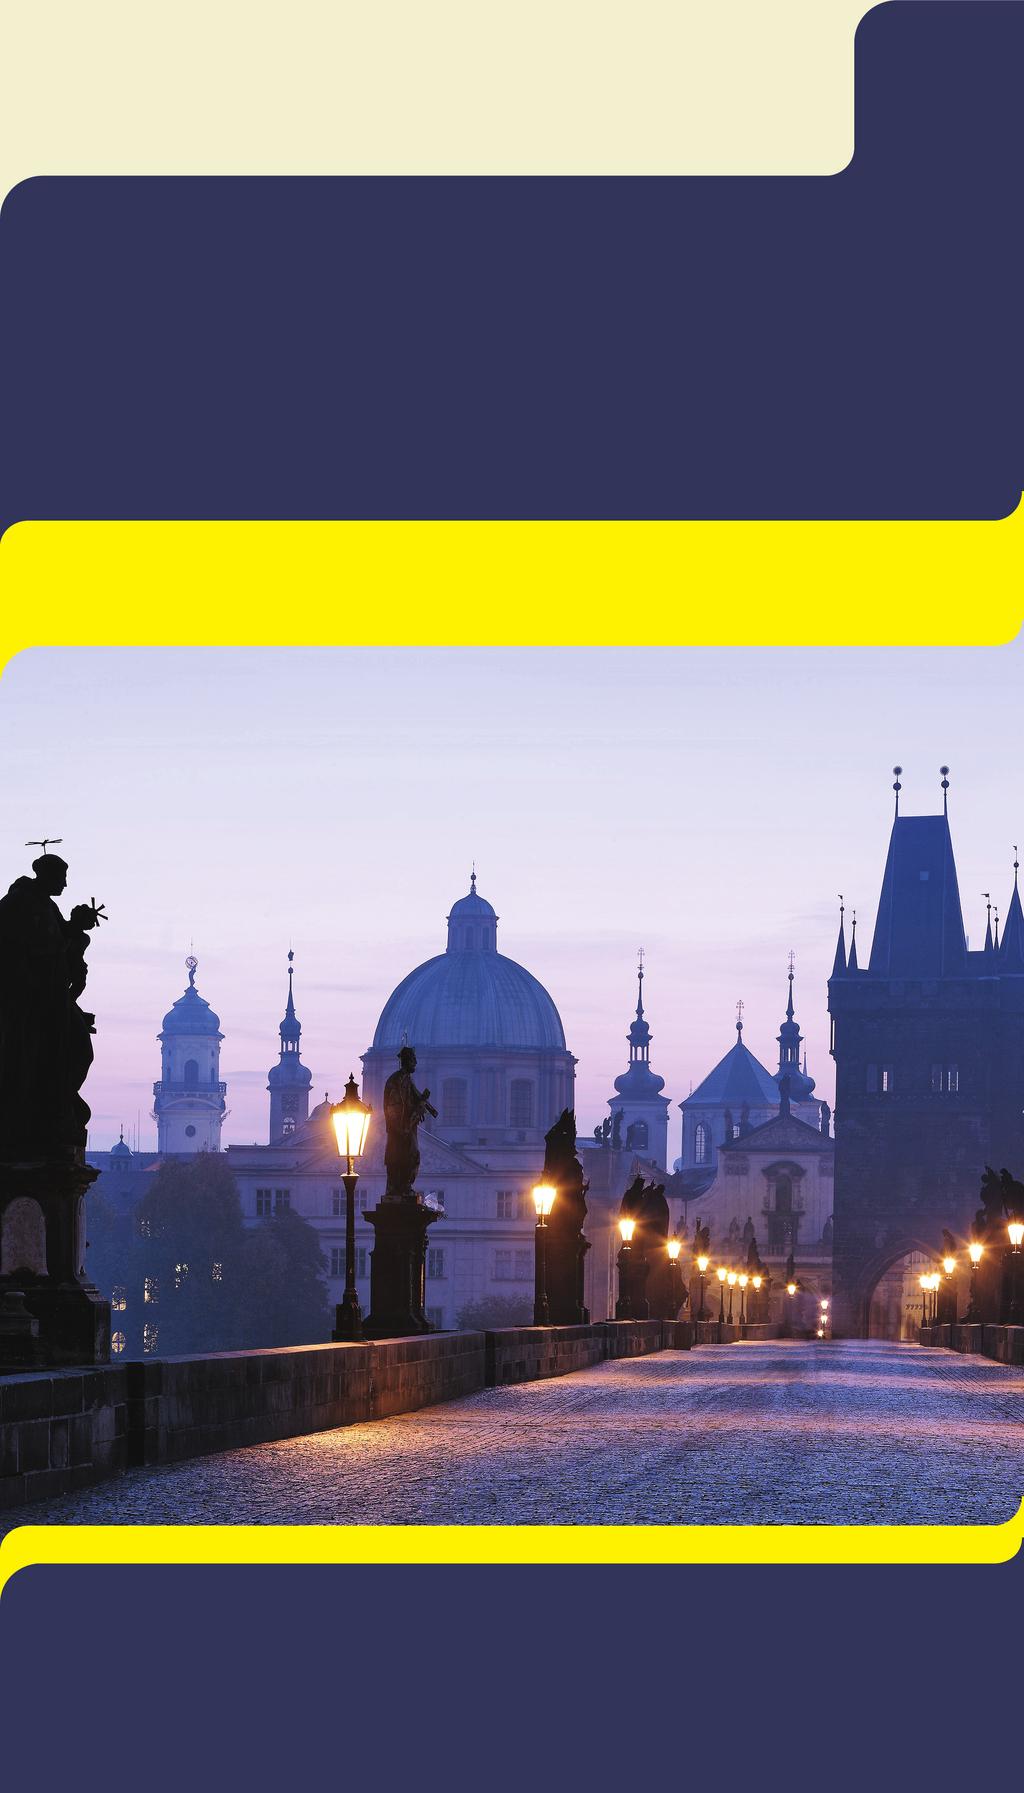 ALUMNI Rollins College Alumni Association presents DISCOVERING EASTERN EUROPE April 21-May 7, 2015 17 days from $4,897 total price from Boston, New York ($4,195 air & land inclusive plus $702 airline